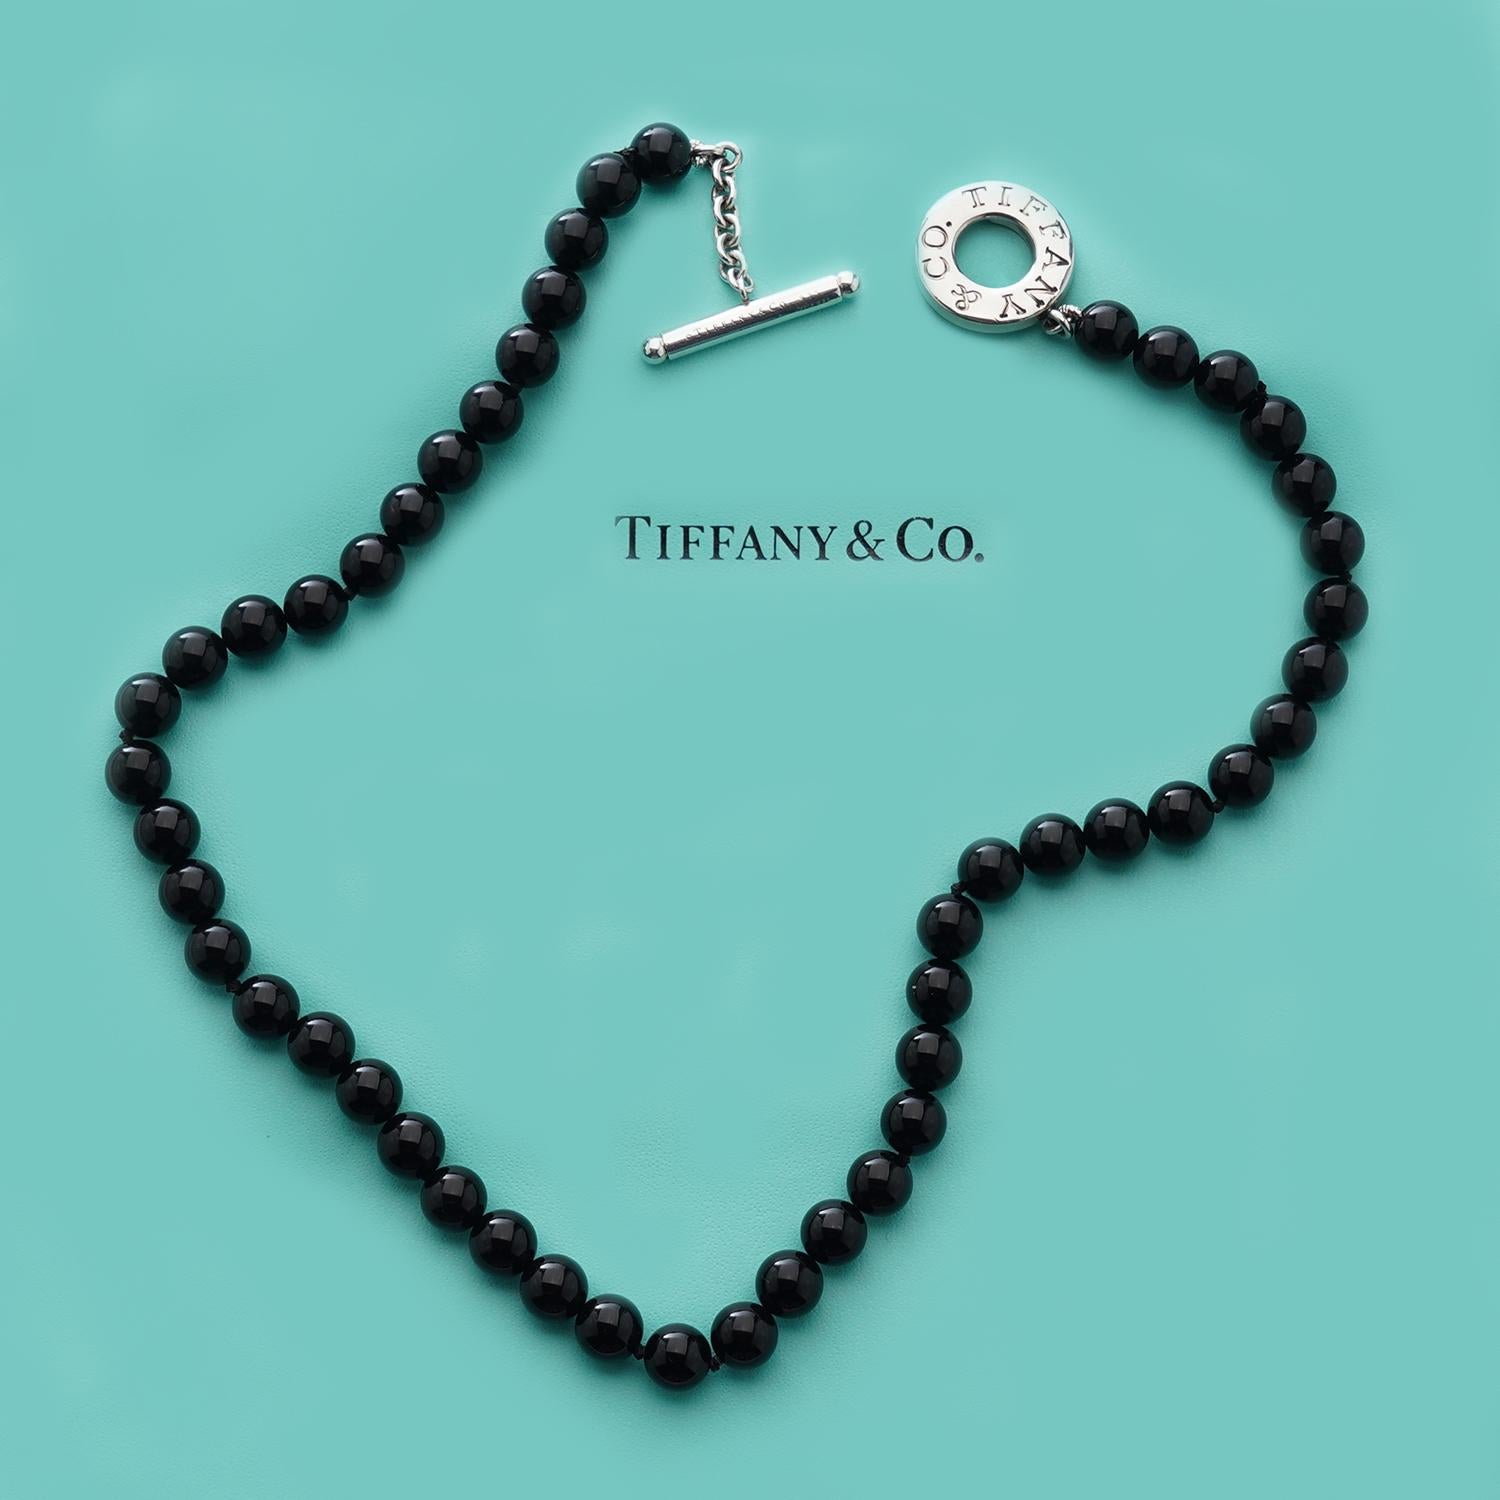 Tiffany & Co ladies 925 silver clasp with black onyx beaded necklace.
Maker: Tiffany & Co.
Made in the London 2007
Fully hallmarked.

With its stylish silver clasp and black onyx bead, this necklace is perfect for any outfit and makes a great